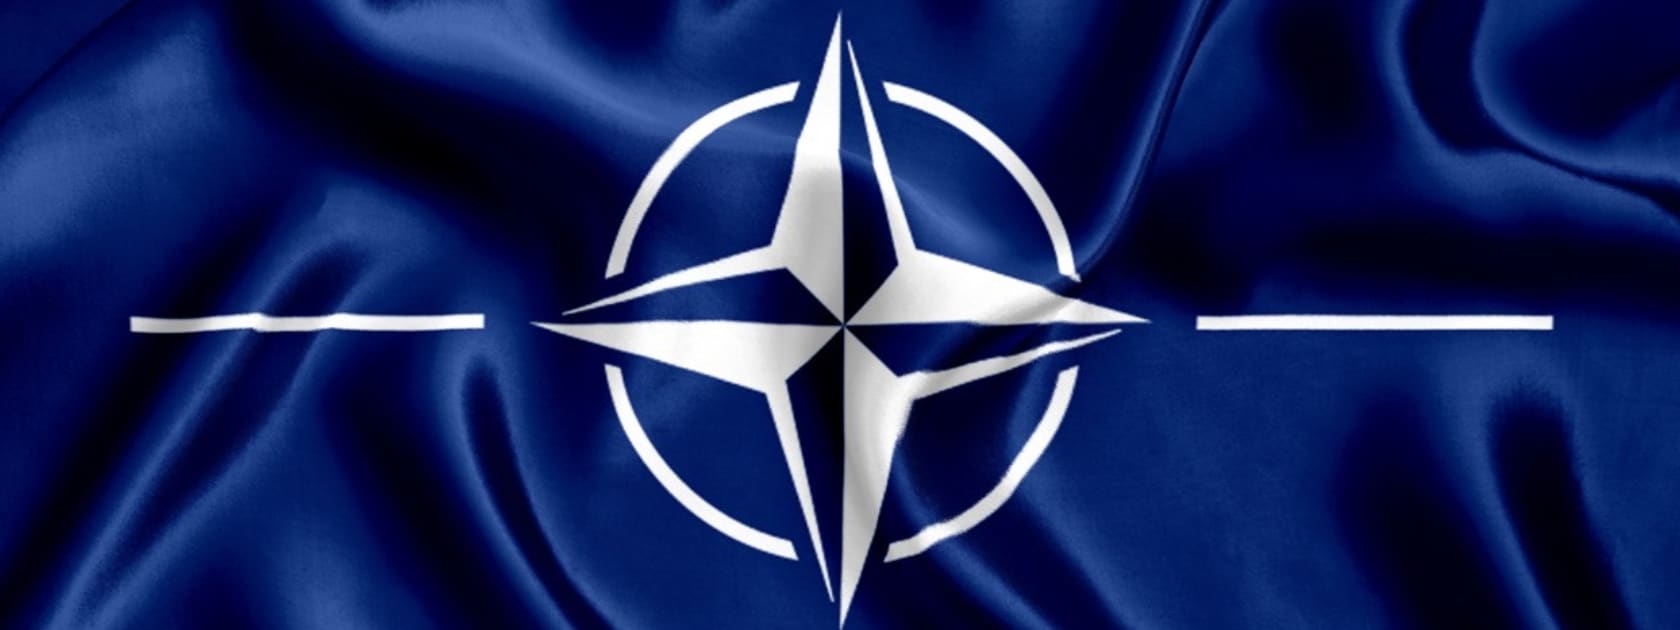 The white four-point NATO star on a blue background